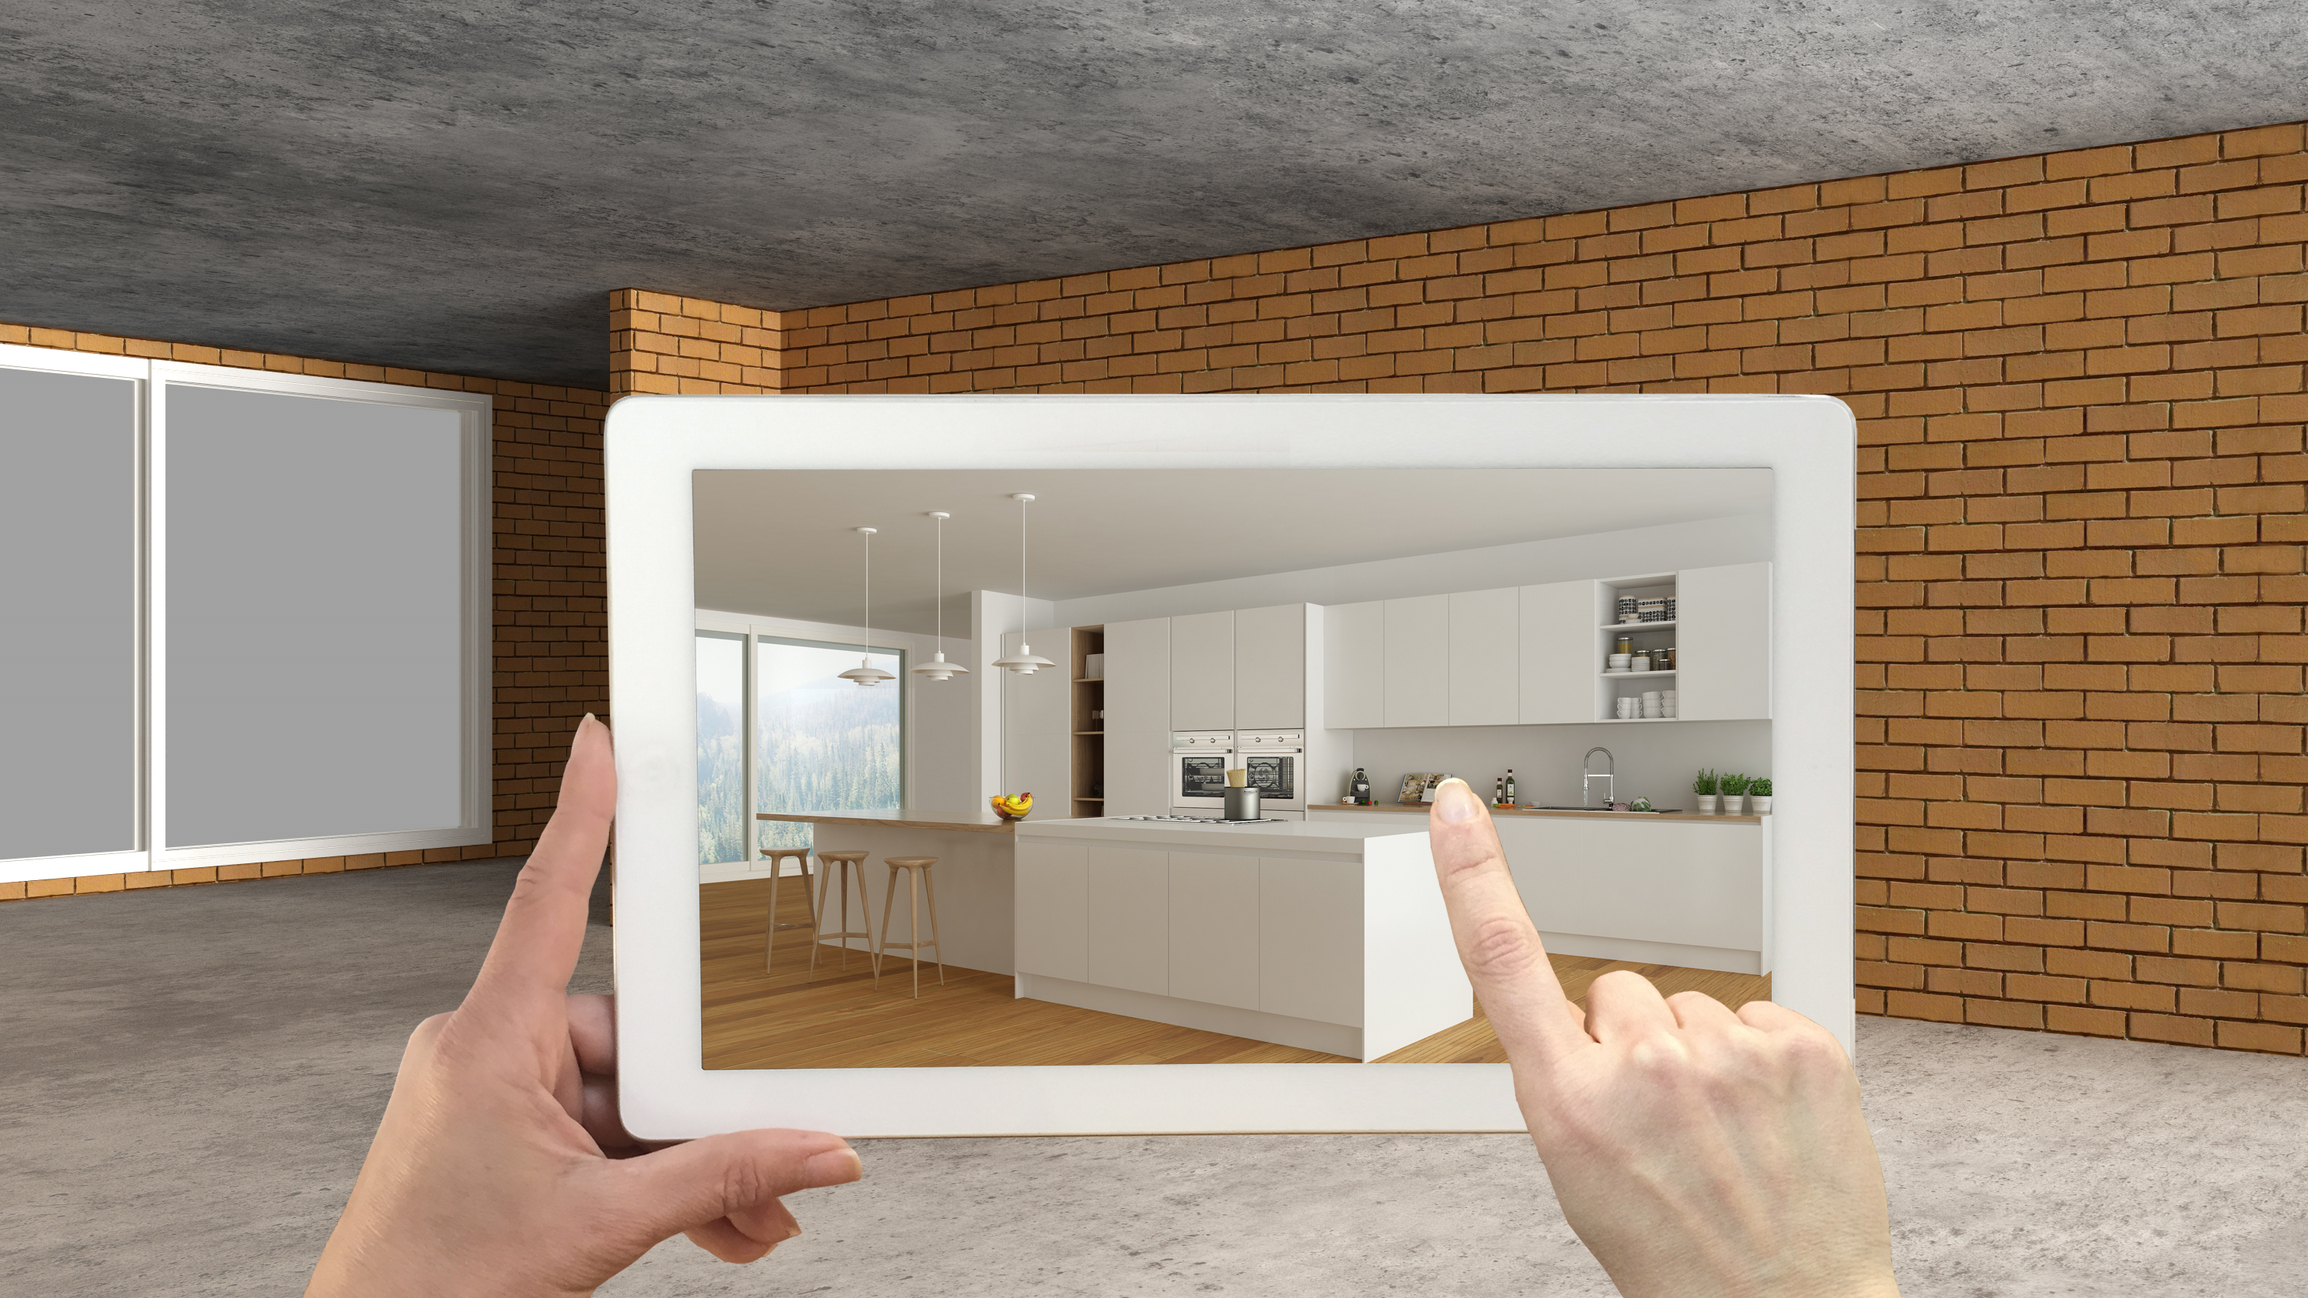 5 Reasons Why Kitchen Cabinet Makers Need Augmented Reality